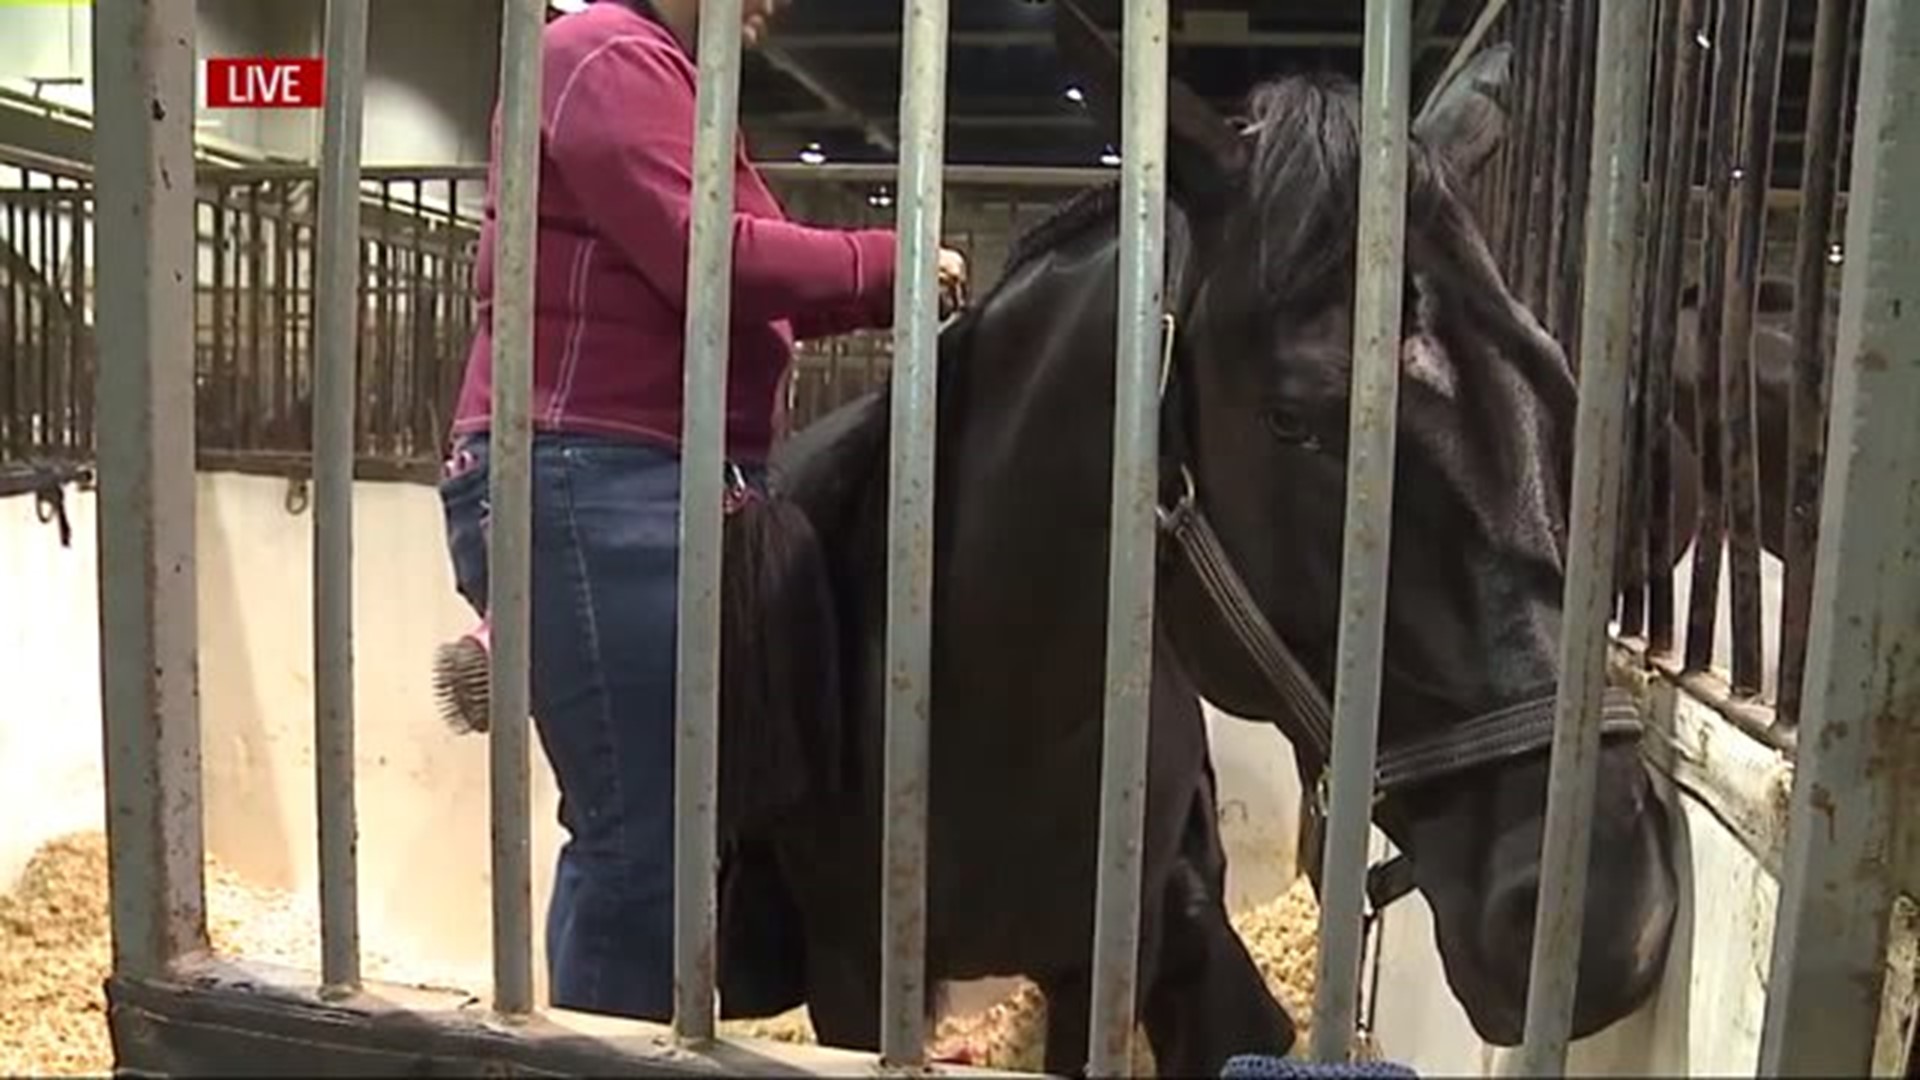 Getting horses ready for the show at the Pennsylvania National Horse Show at the Farm Show Complex in Harrisburg